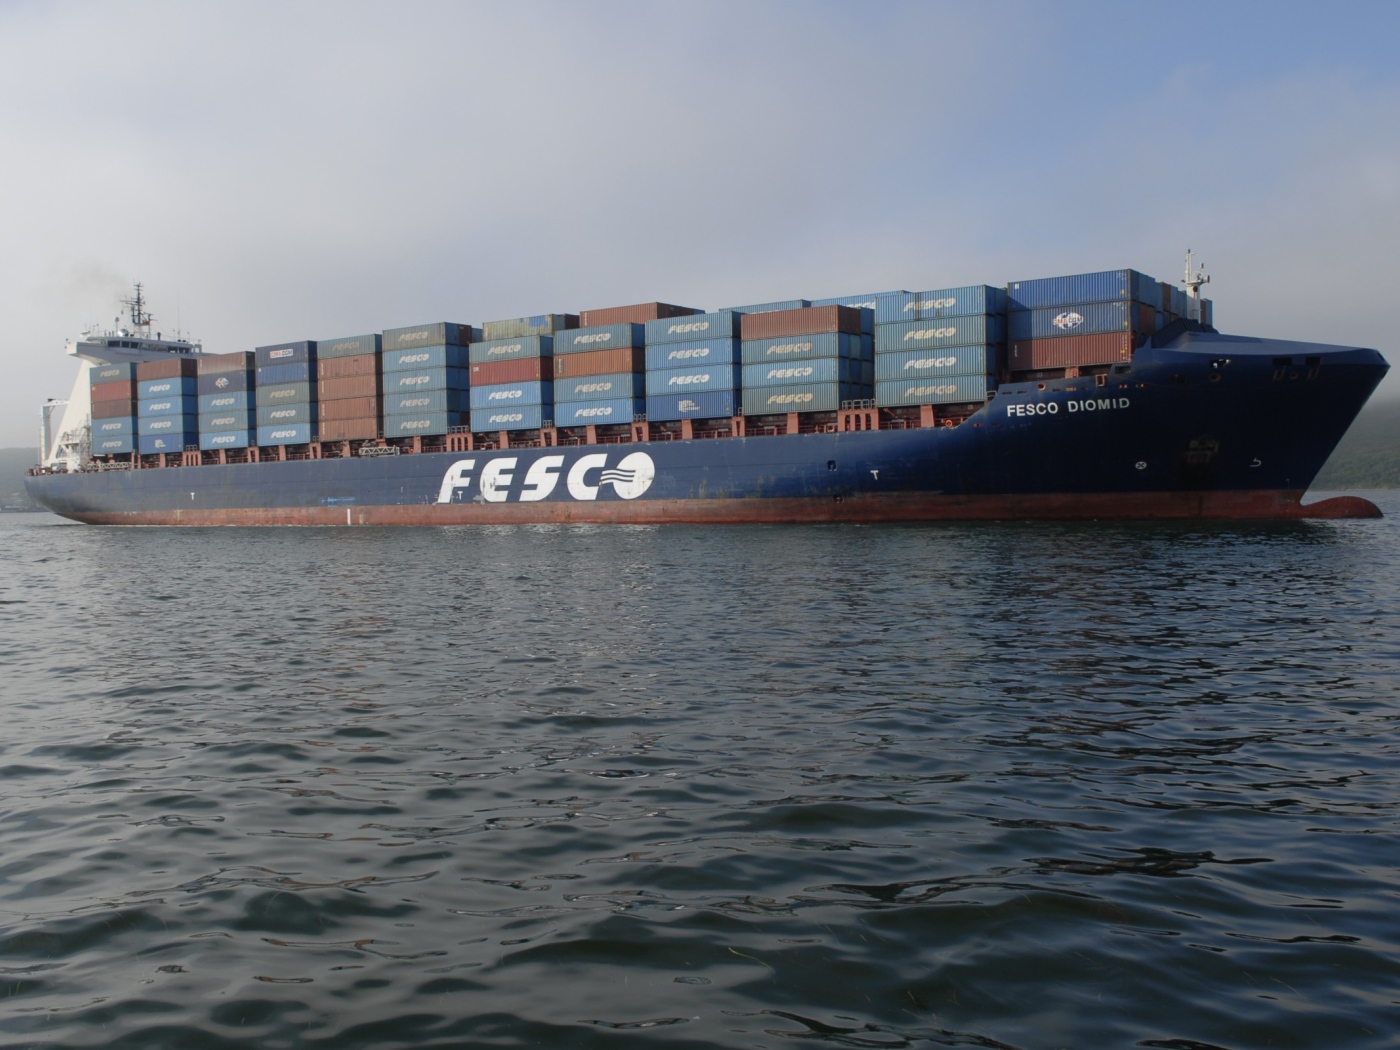 Fesco ship carrying containers